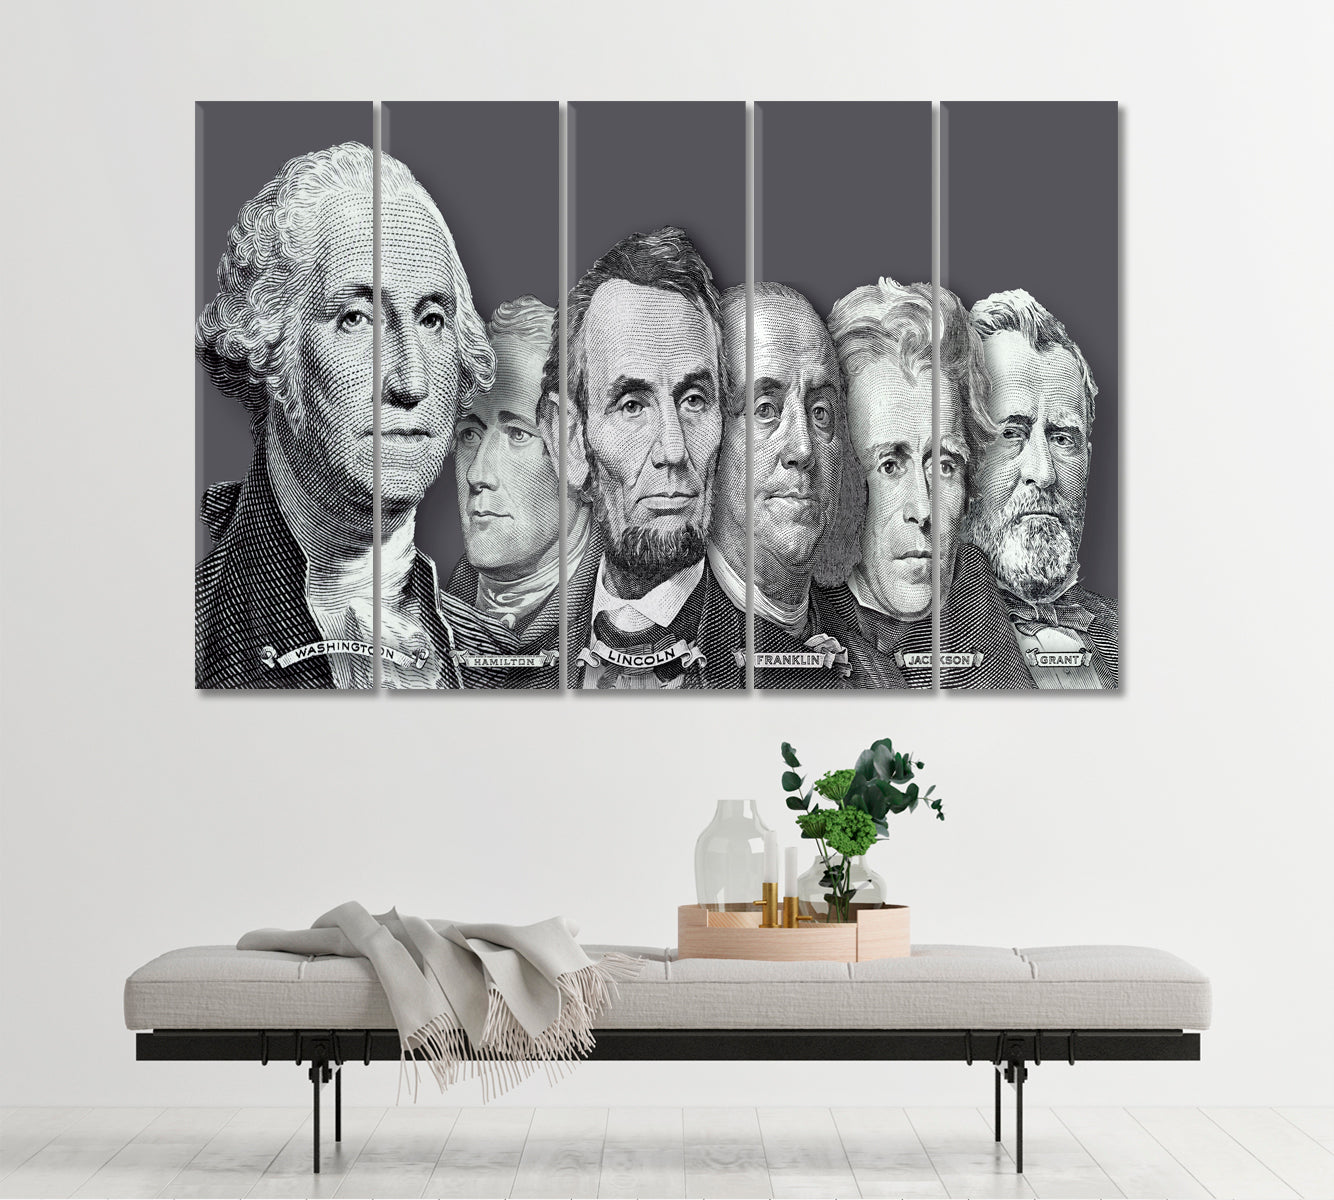 Presidents and Founding Fathers of the United States Business Concept Wall Art Artesty 5 panels 36" x 24" 